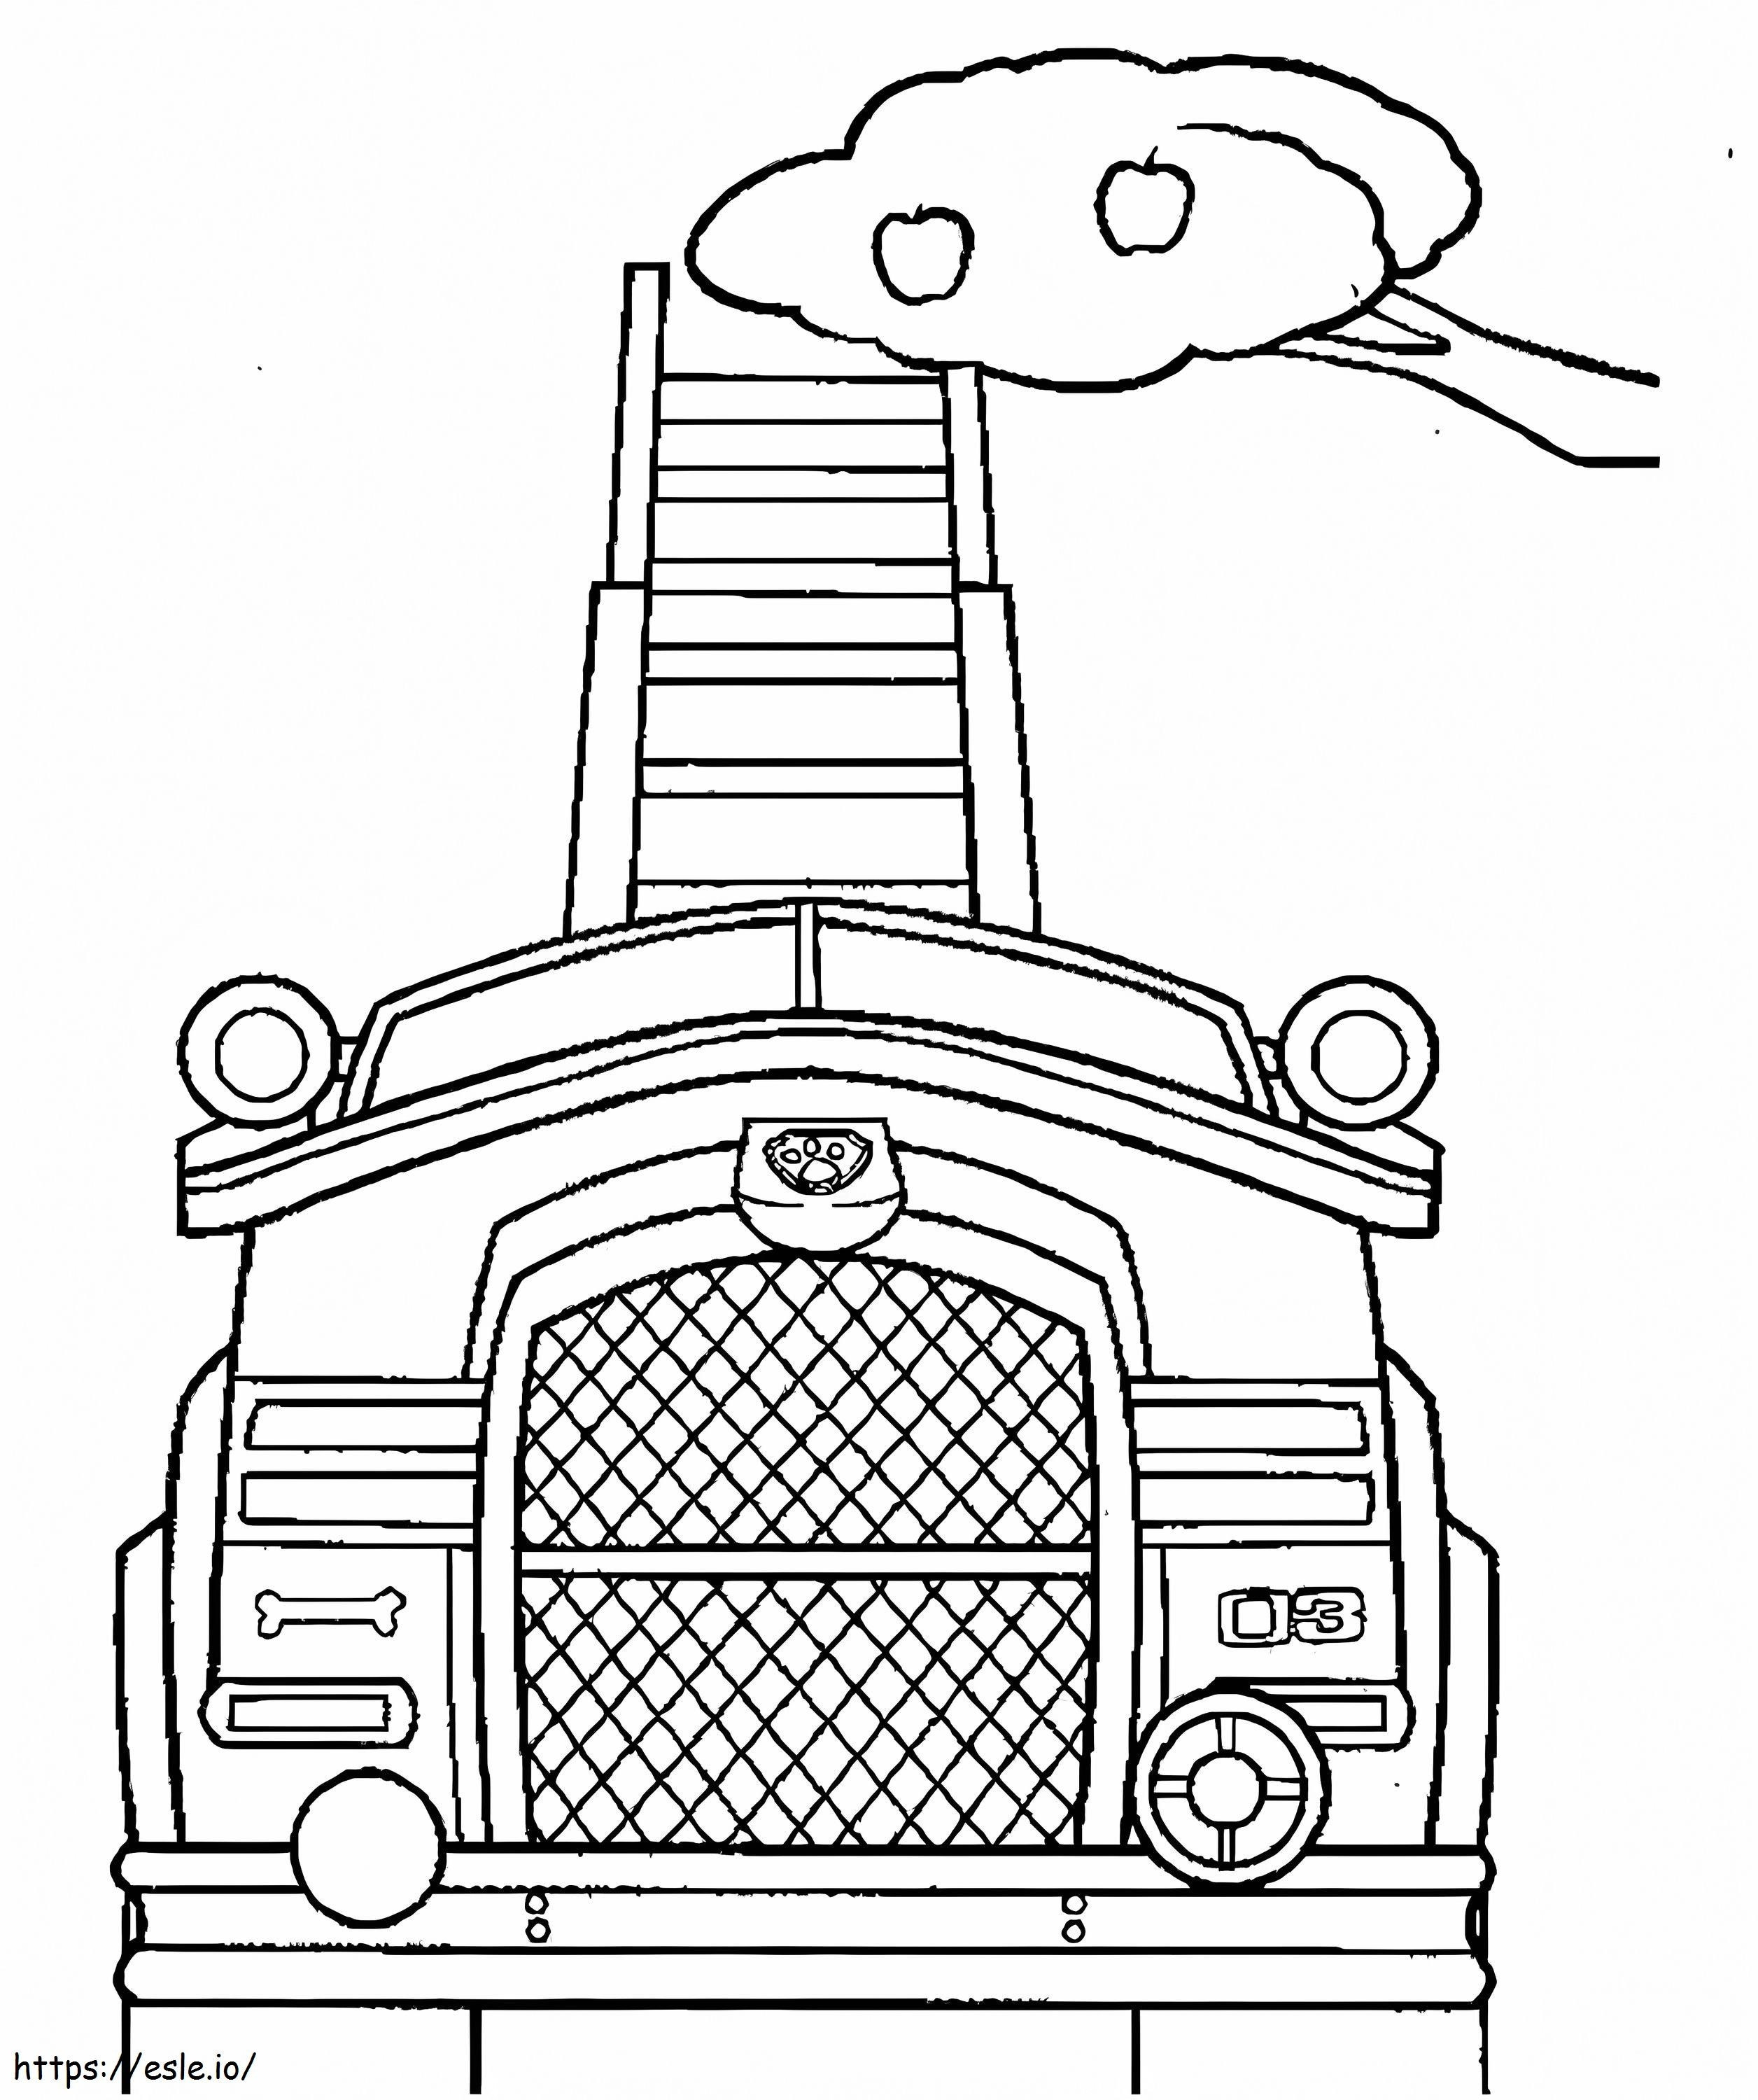 Marshall Fire Truck coloring page